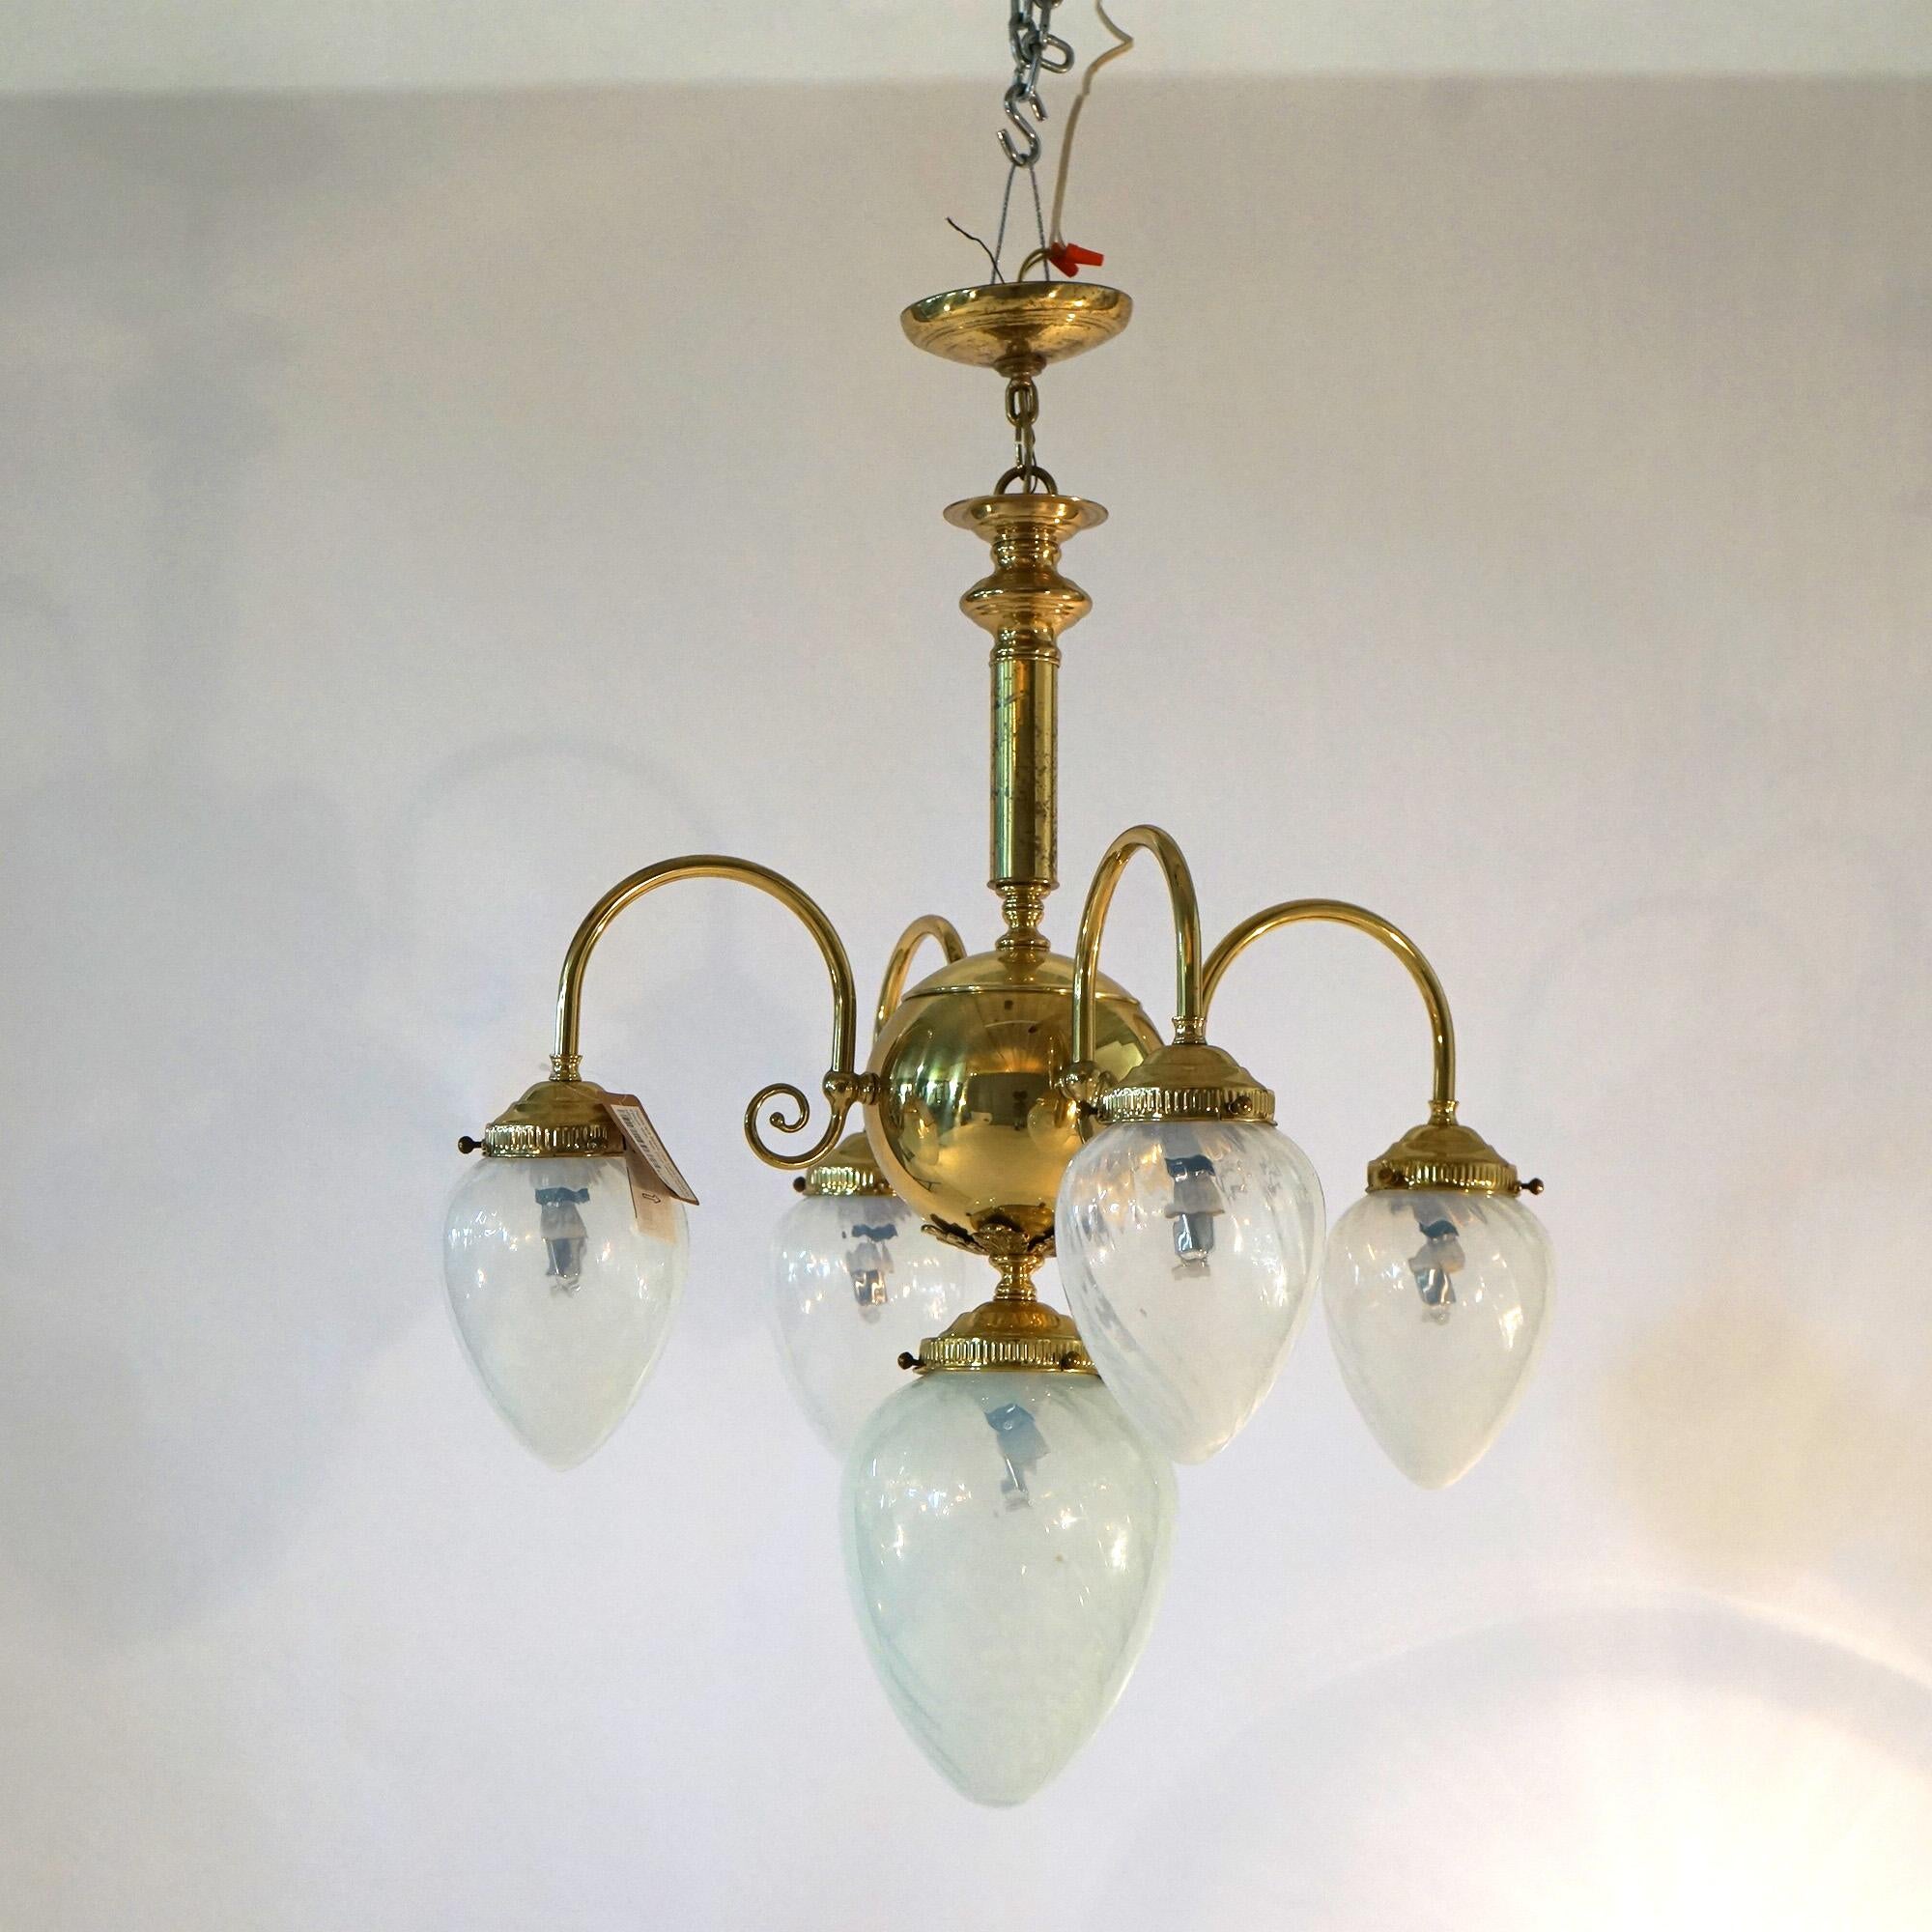 American Brass Five-Light Hanging Fixture with Tear Drop Swirl Glass Shades 20th C For Sale